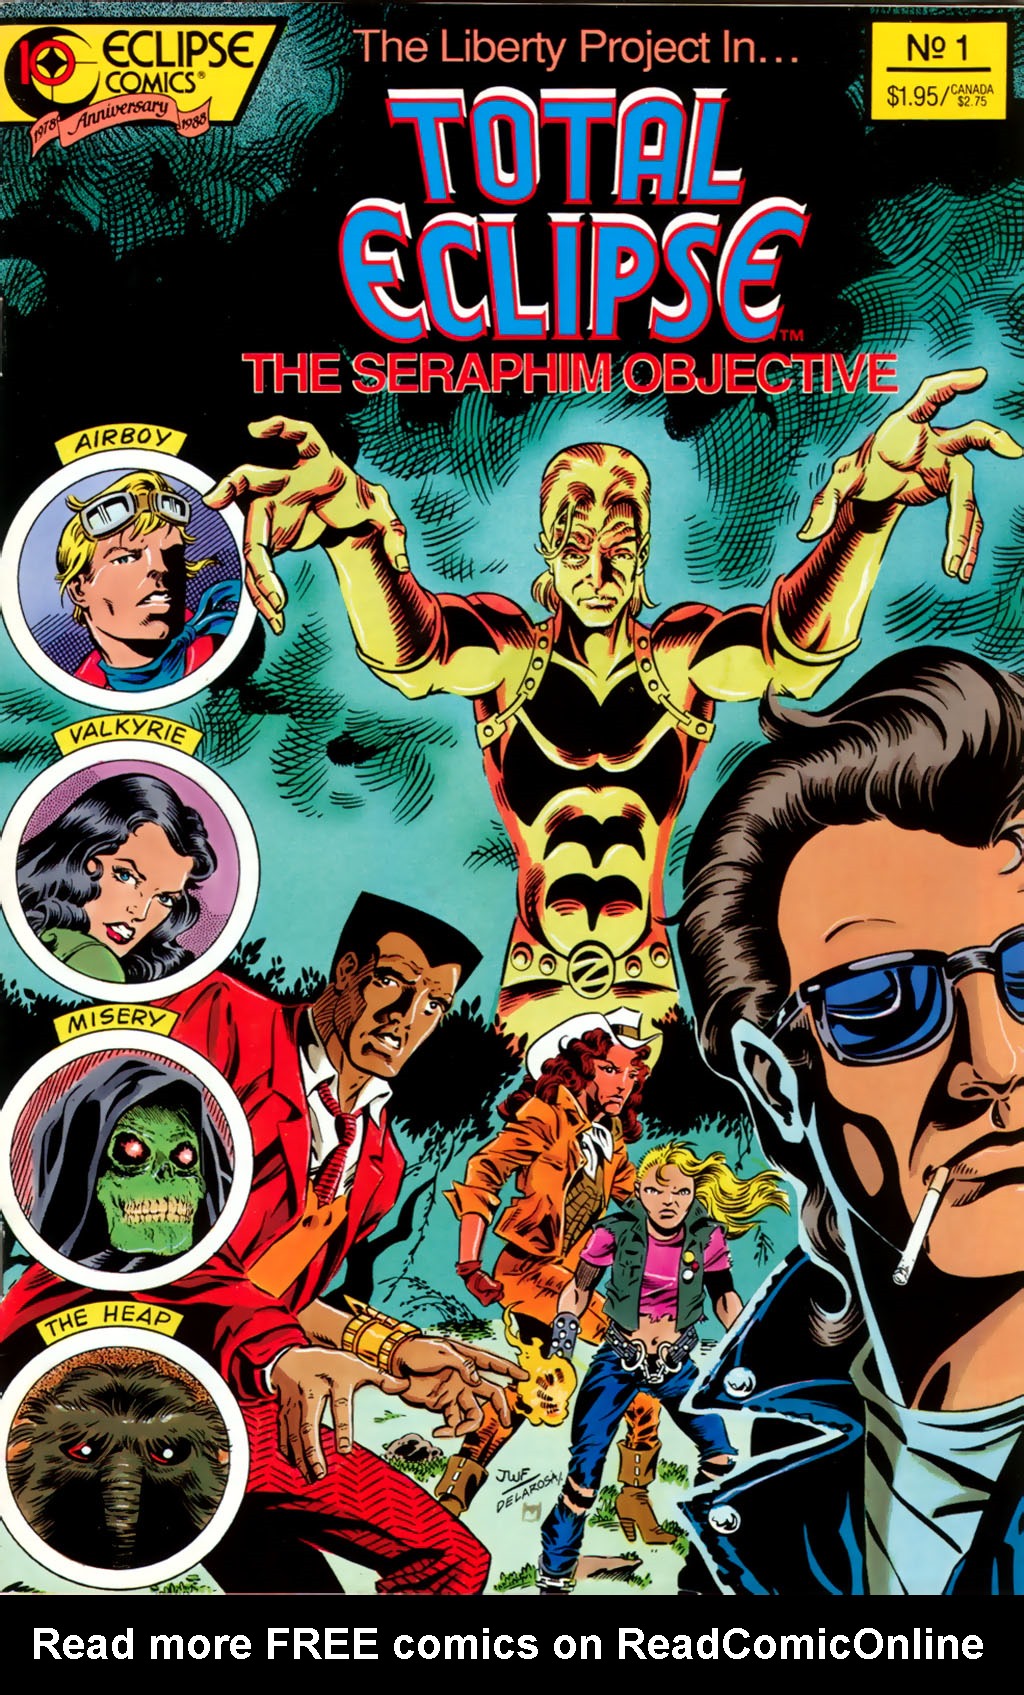 Read online Total Eclipse: The Seraphim Objective comic -  Issue # Full - 1